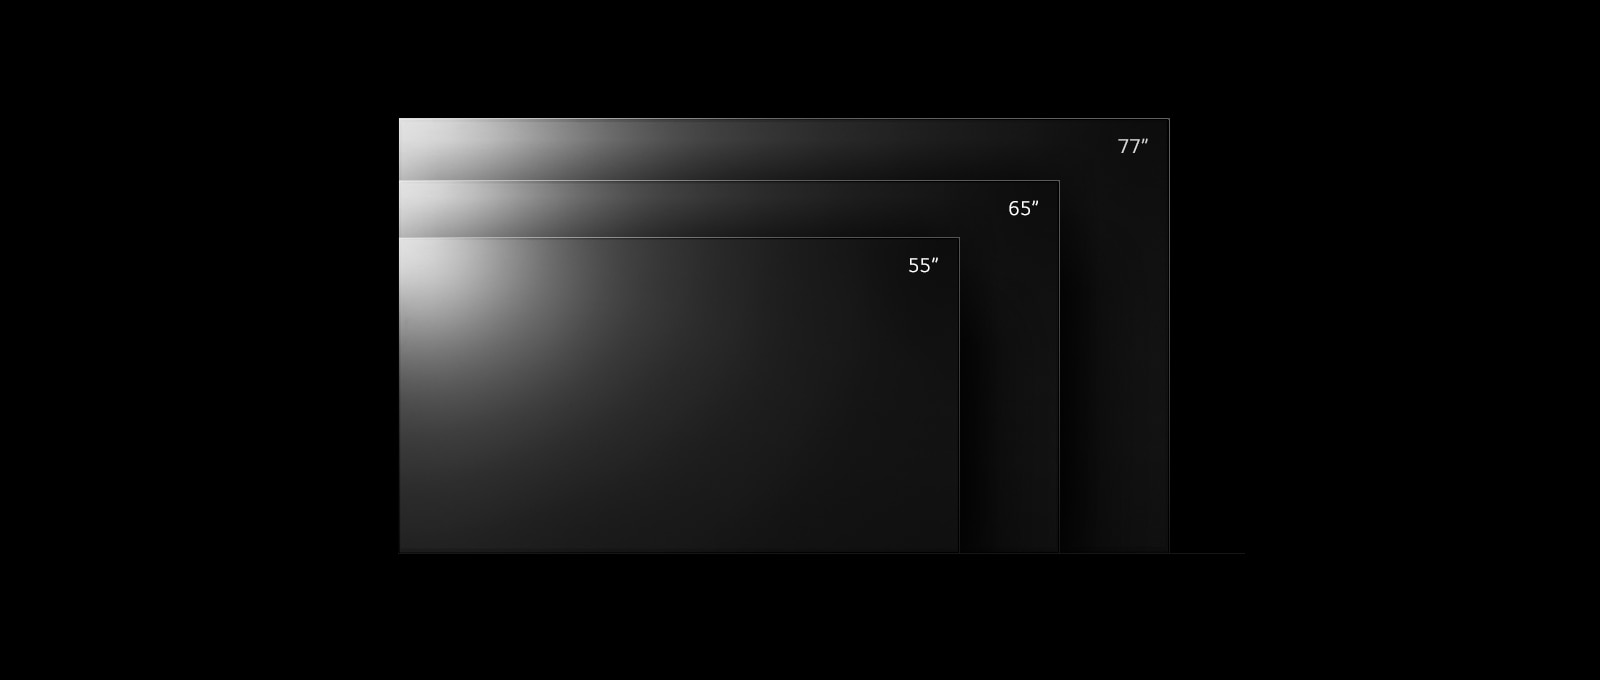 LG OLED G2 TV lineup in various sizes from 55 inches to 77 inches.